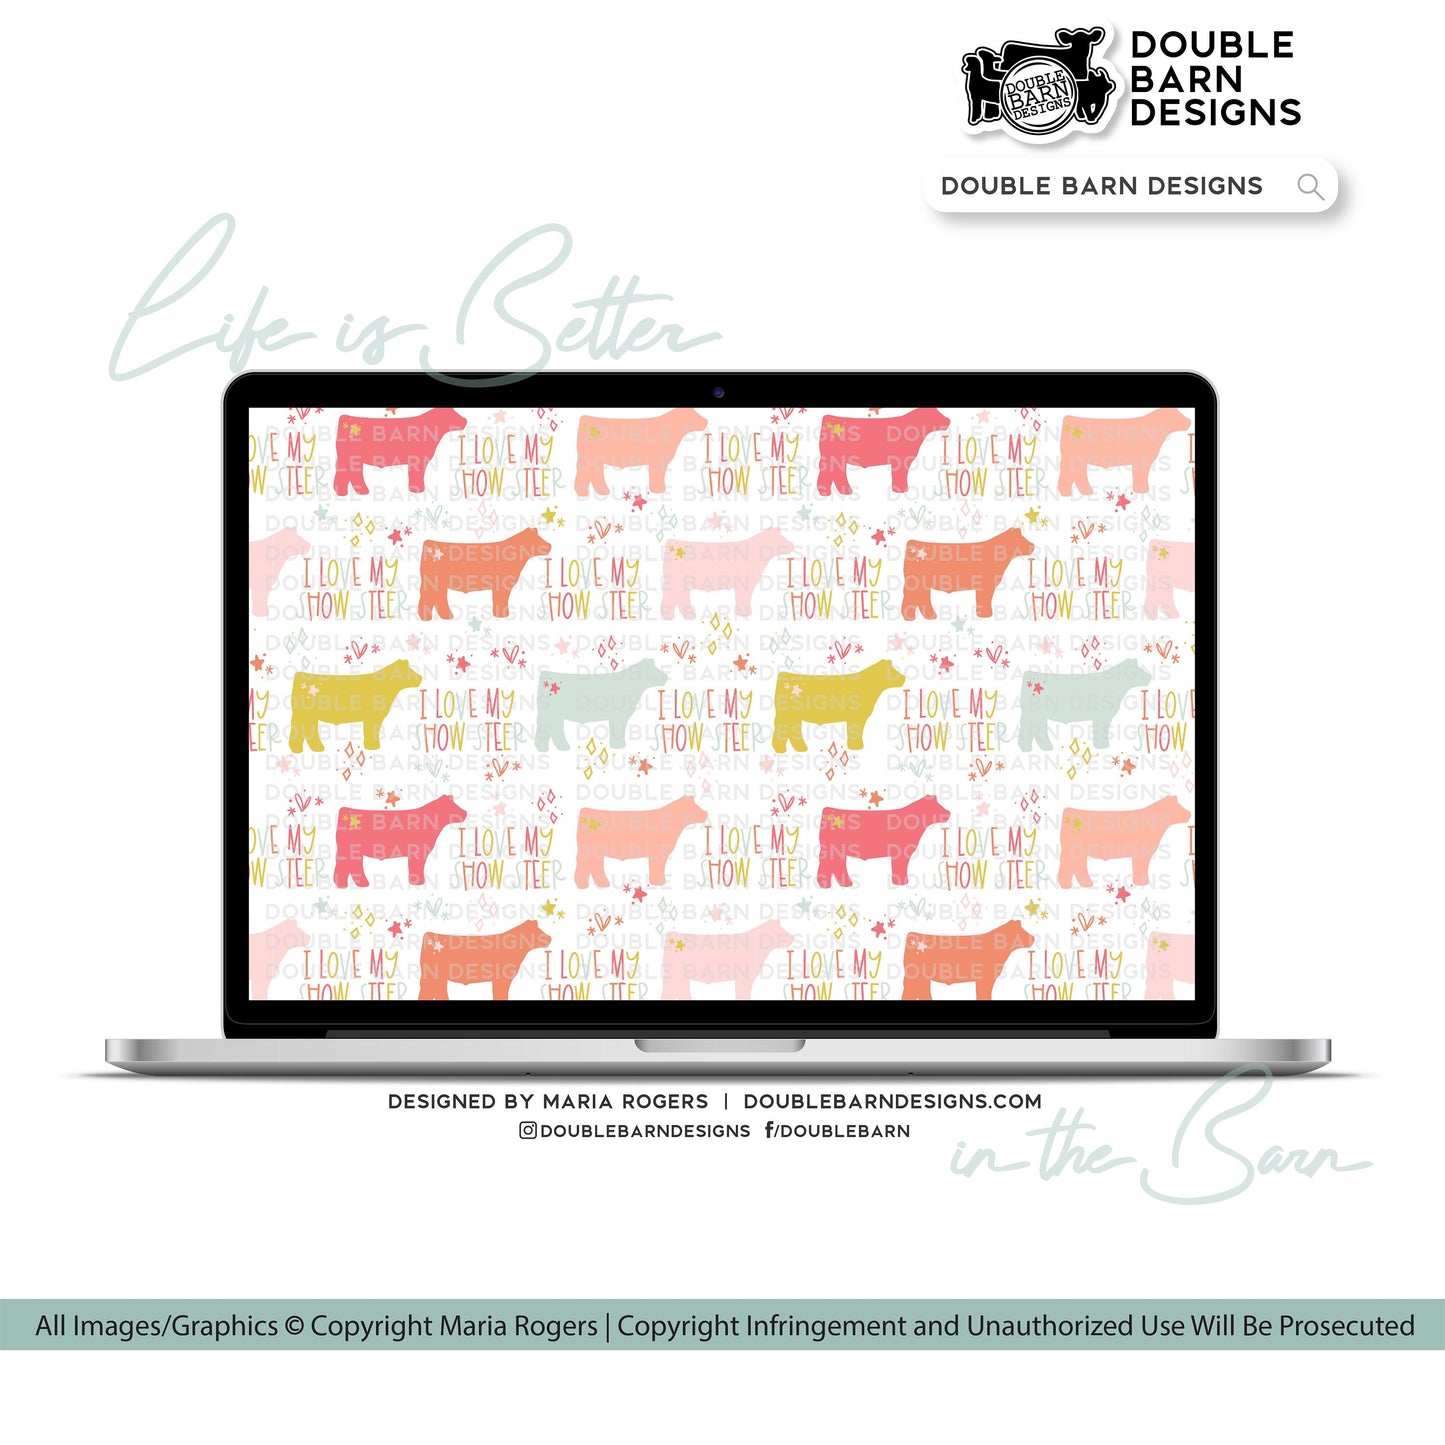 I Love My Show Steer Seamless Pattern - Show Steer - PNG JPG Ai Files Included | Commercial Use